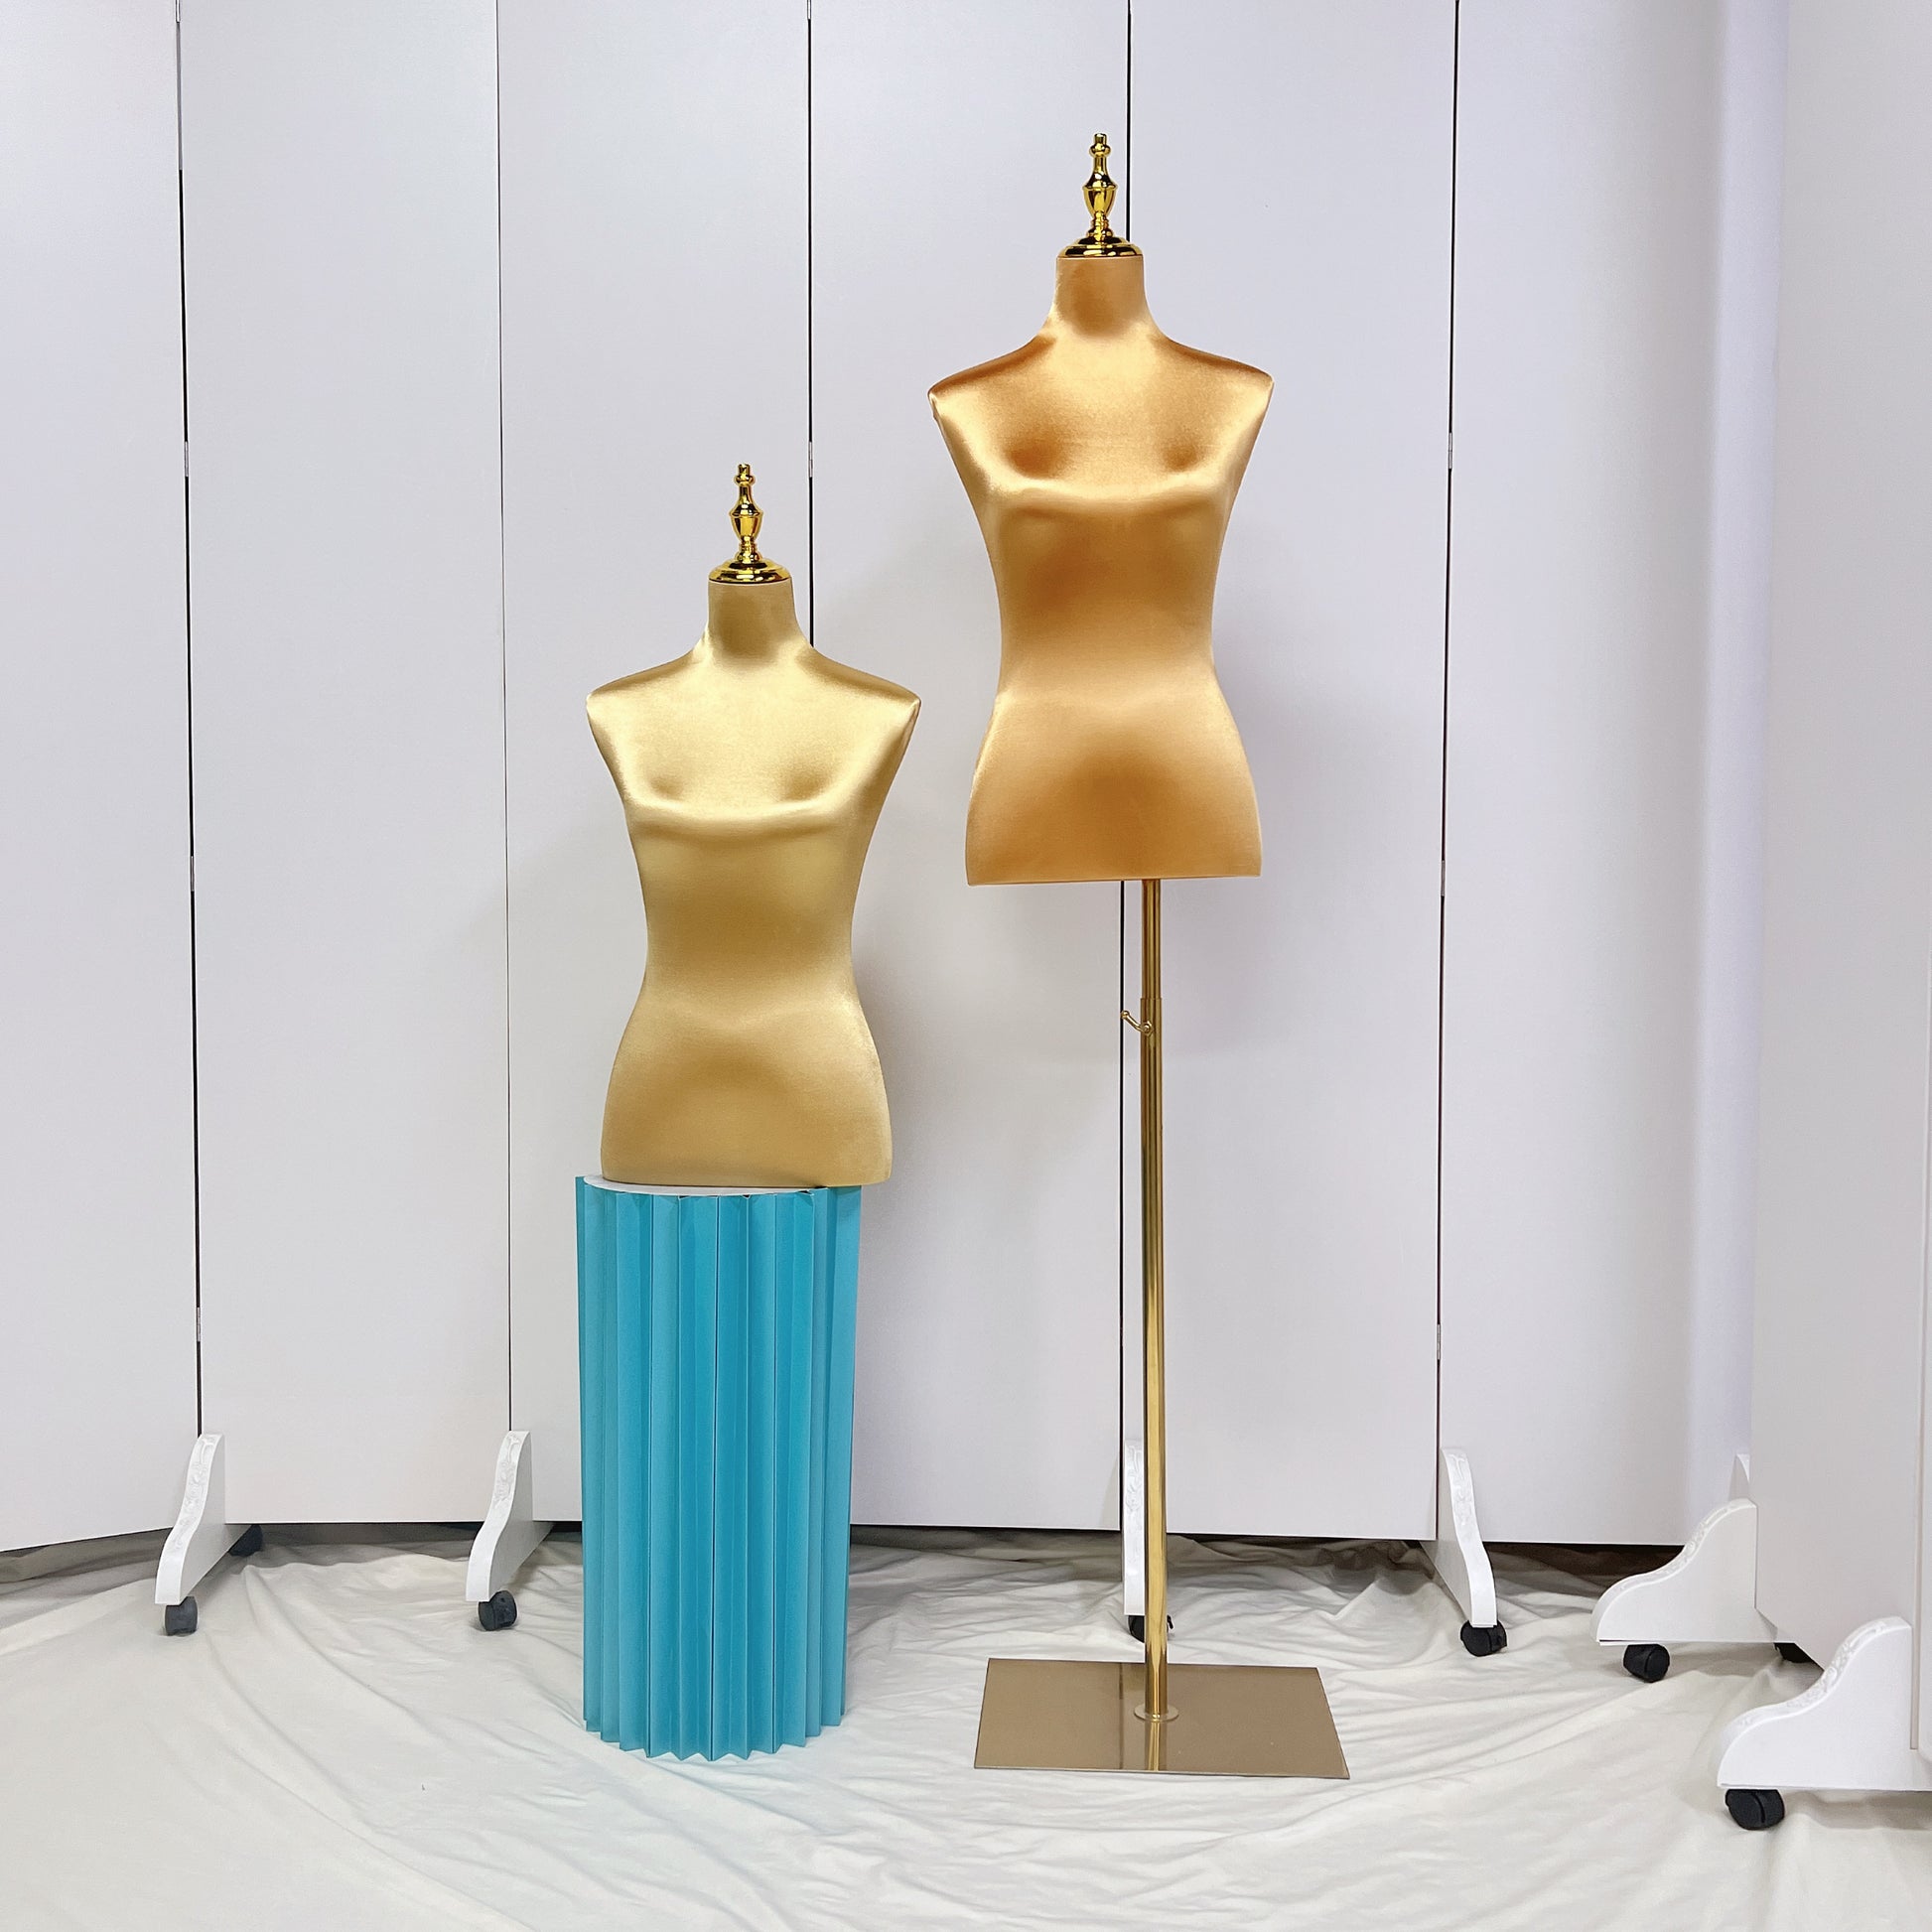 Clearance Satin Female Half Body Mannequin, Adjustable Women Silk Dress form Torso, Clothing Model Props,Lady Display Form with Golden Base DE-LIANG